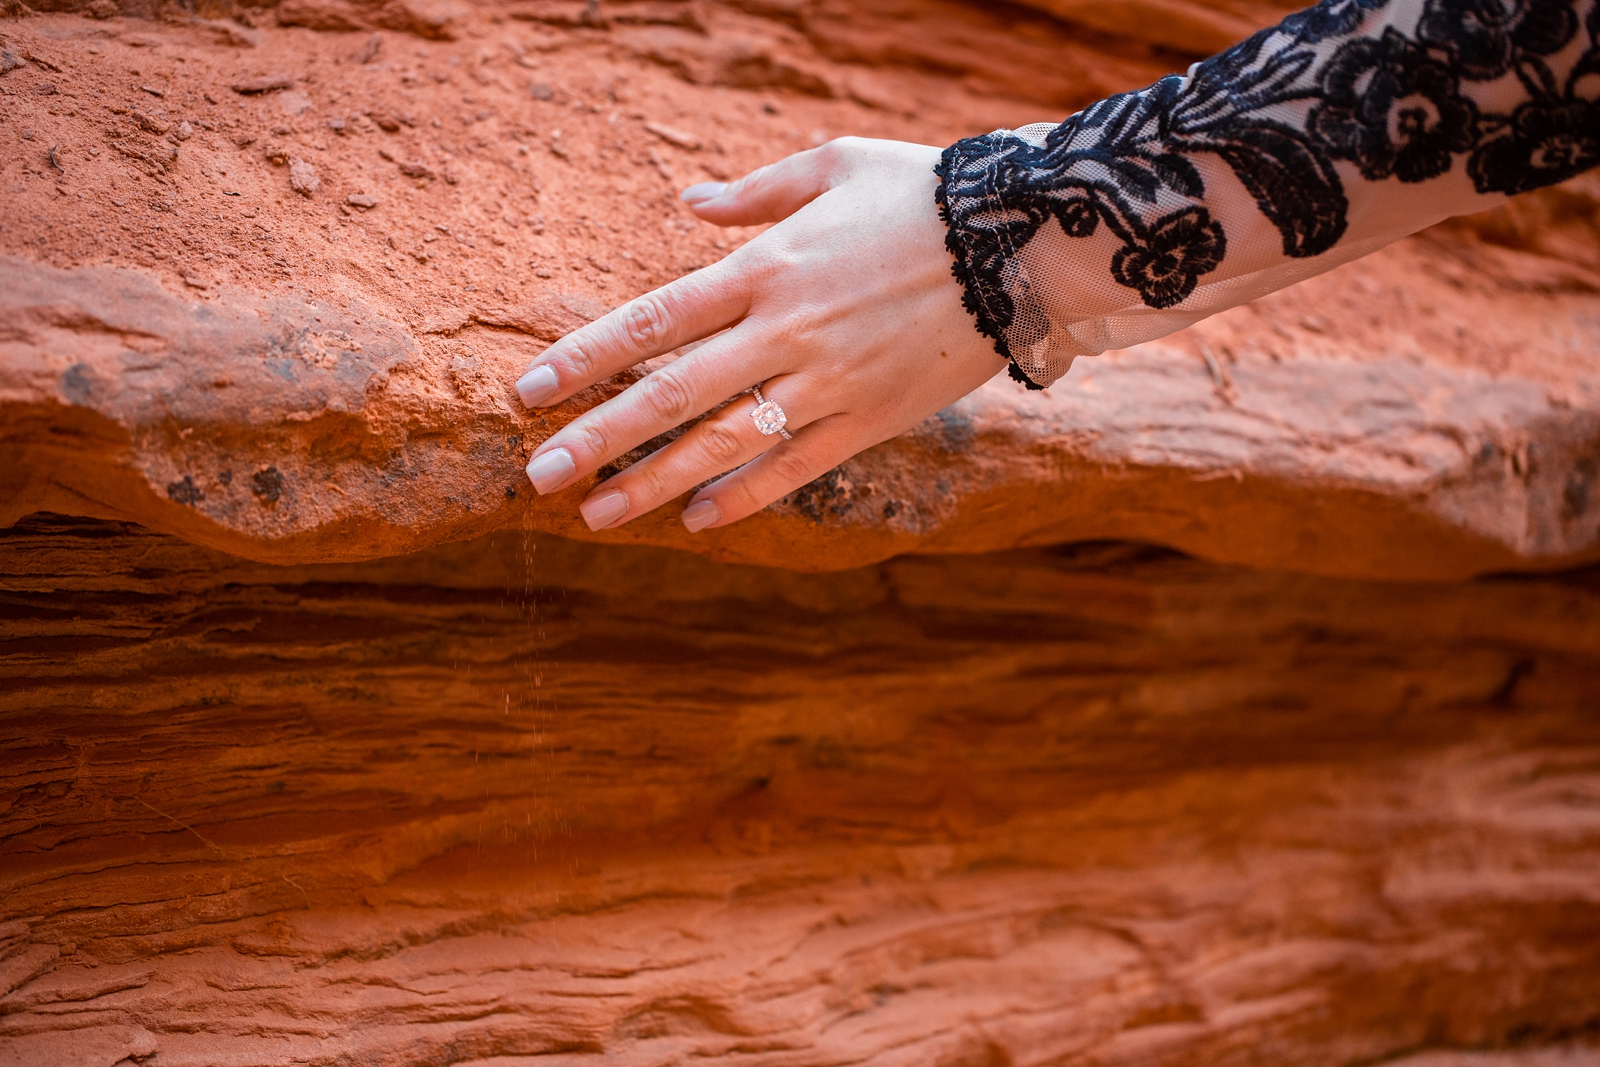 Engagement ring in a southern Utah slot canyon.